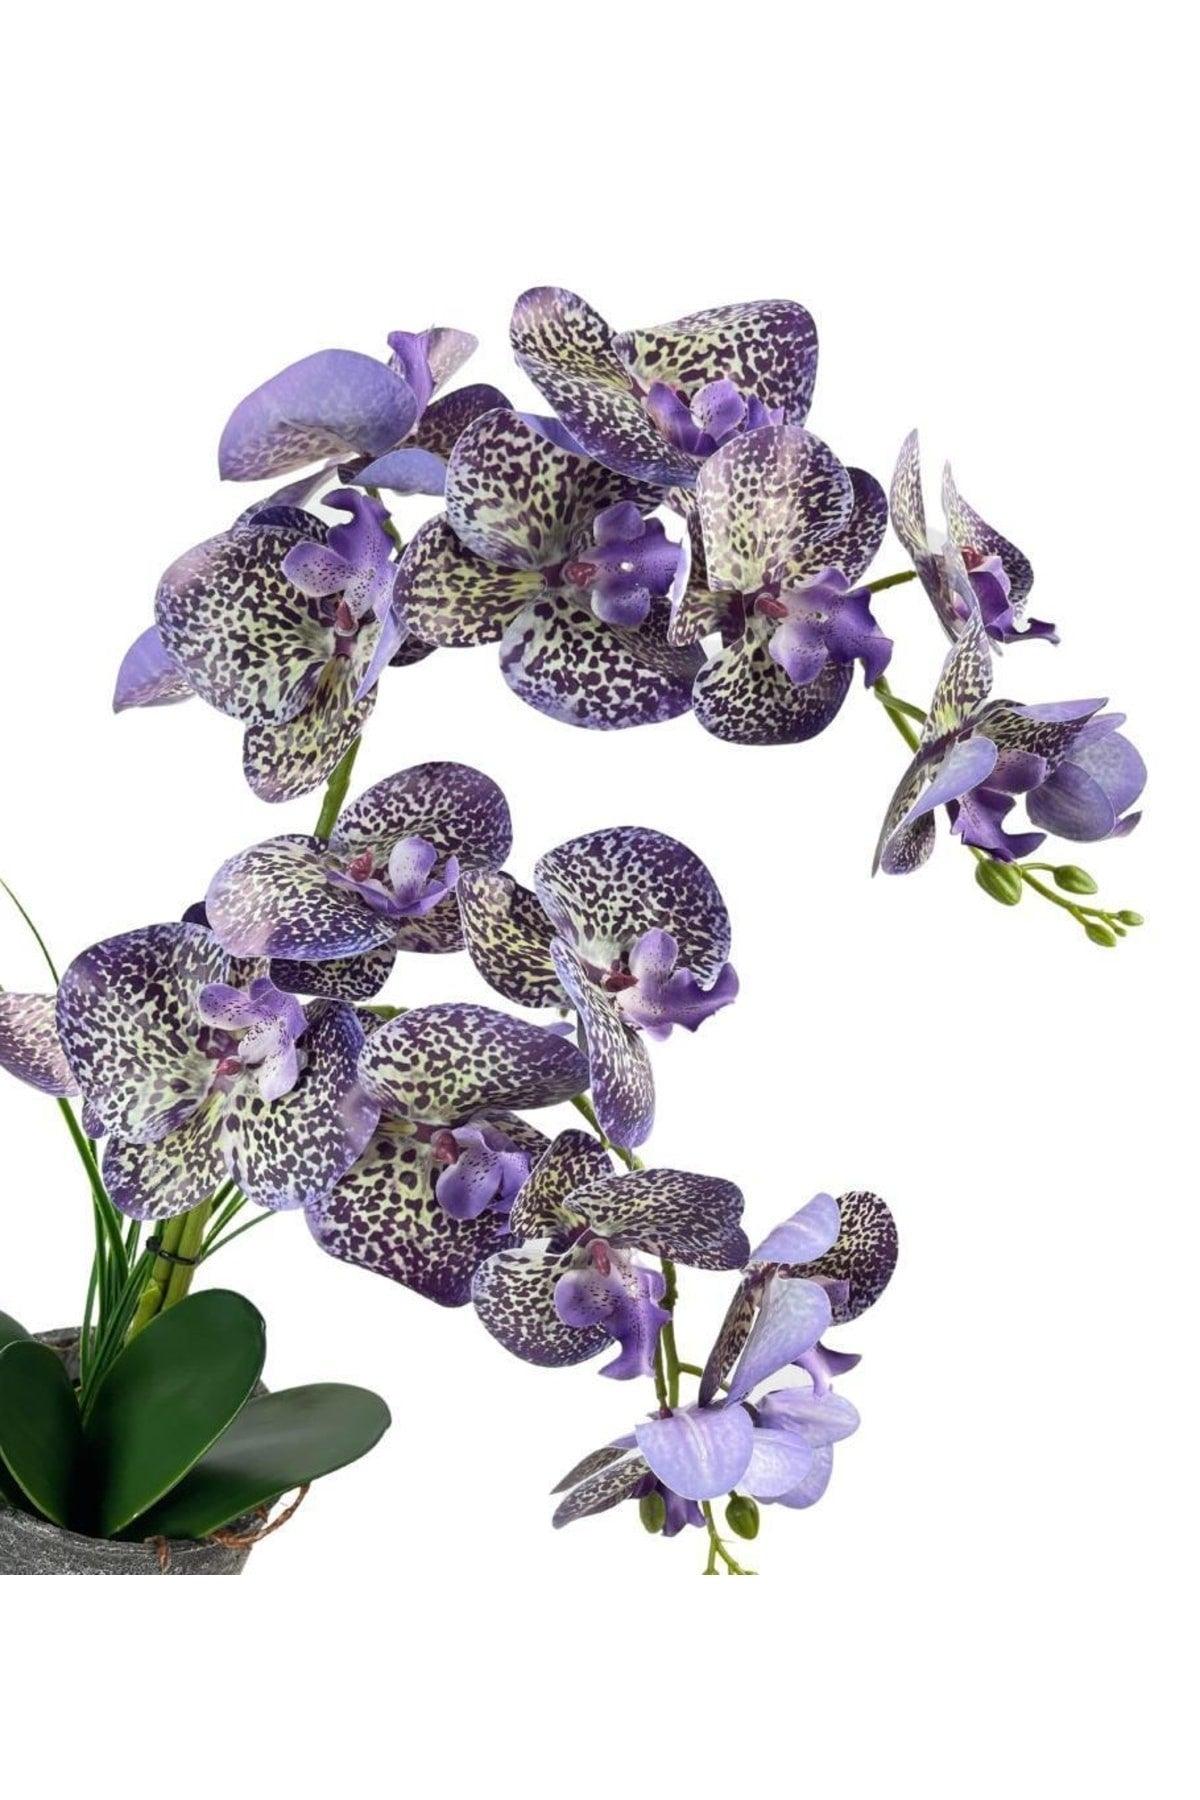 Artificial Flower 2 Lilac Wet Orchid Spotted Orchid in Ceramic Pot 60cm - Swordslife